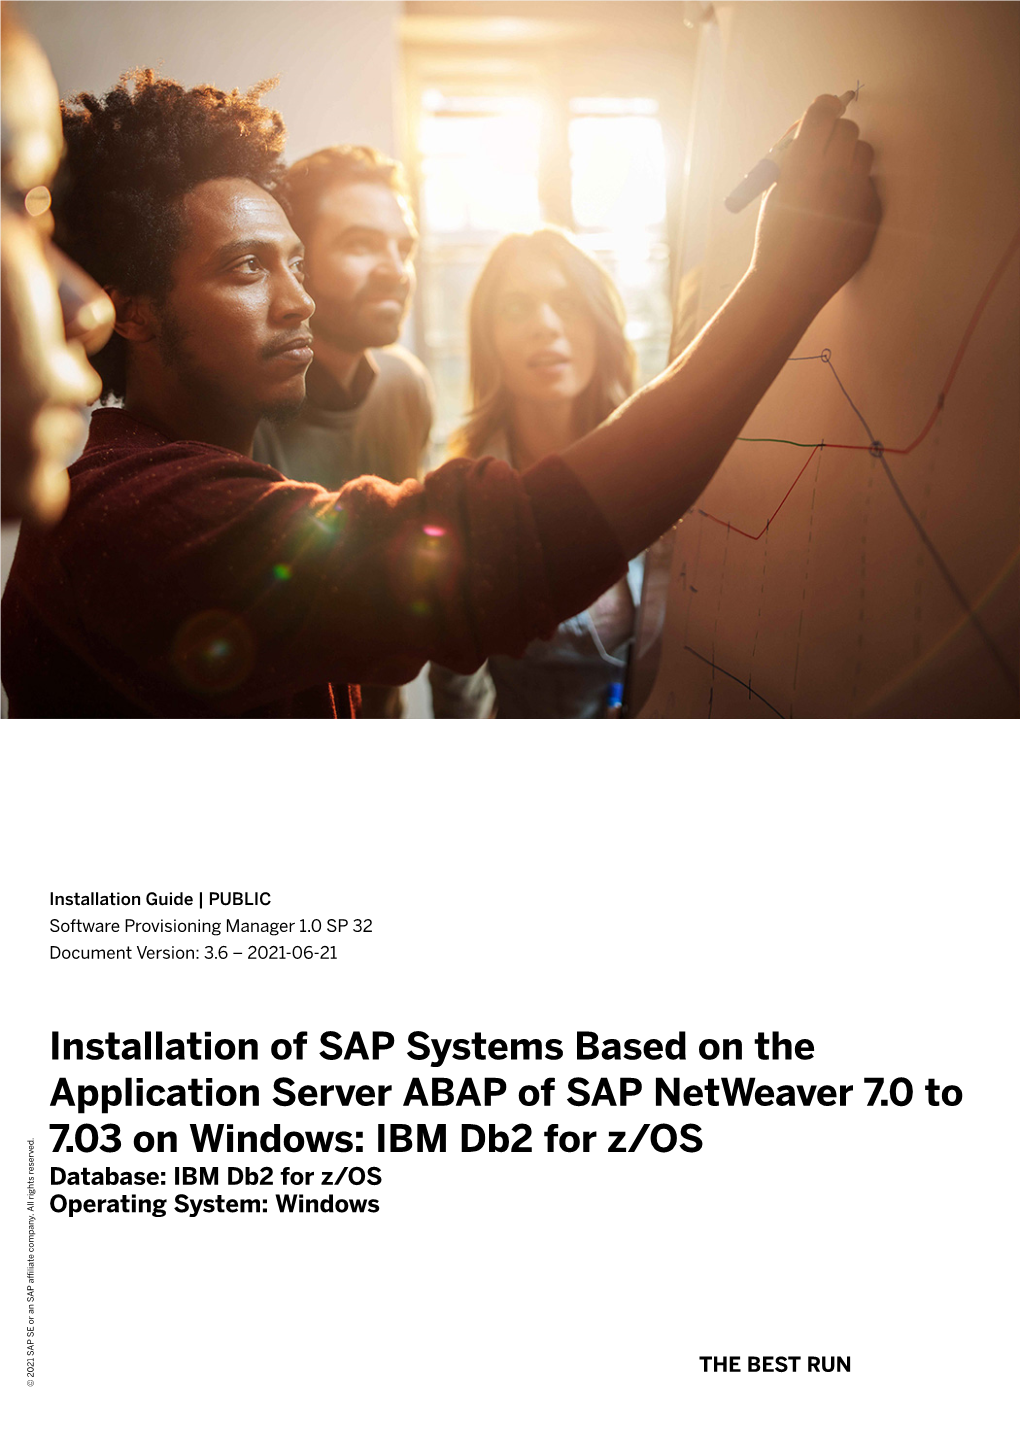 Installation of SAP Systems Based on the Application